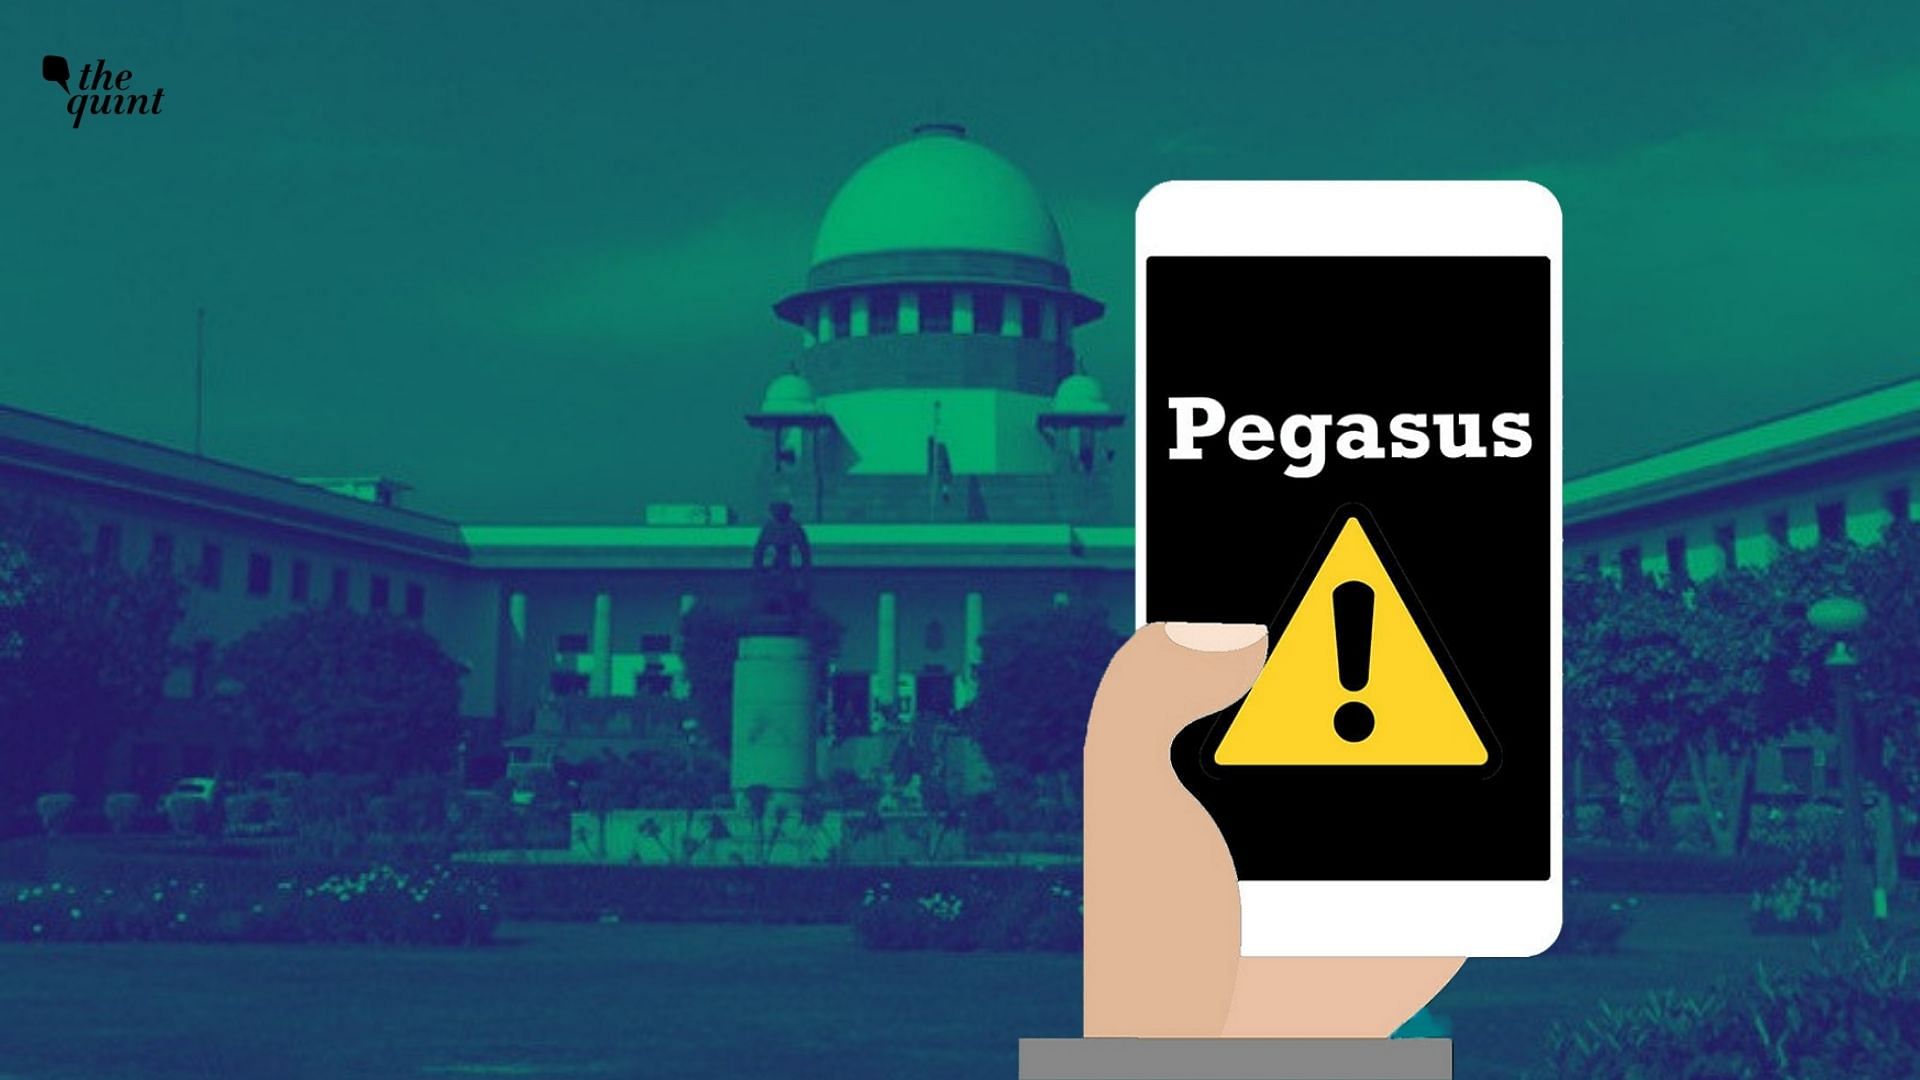 <div class="paragraphs"><p>Hailing the Supreme Court's order on the <a href="https://www.thequint.com/news/law/pegasus-probe-what-is-technical-committee-supposed-to-investigate-powers-recommendations">Pegasus row</a> as a good step, the Internet Freedom Foundation's Apar Gupta and Centre for Communication Governance's Gunjan Chawla on Wednesday, 27 October, pointed out that we still need to wait for the results. Image used for representation purpose.</p></div>